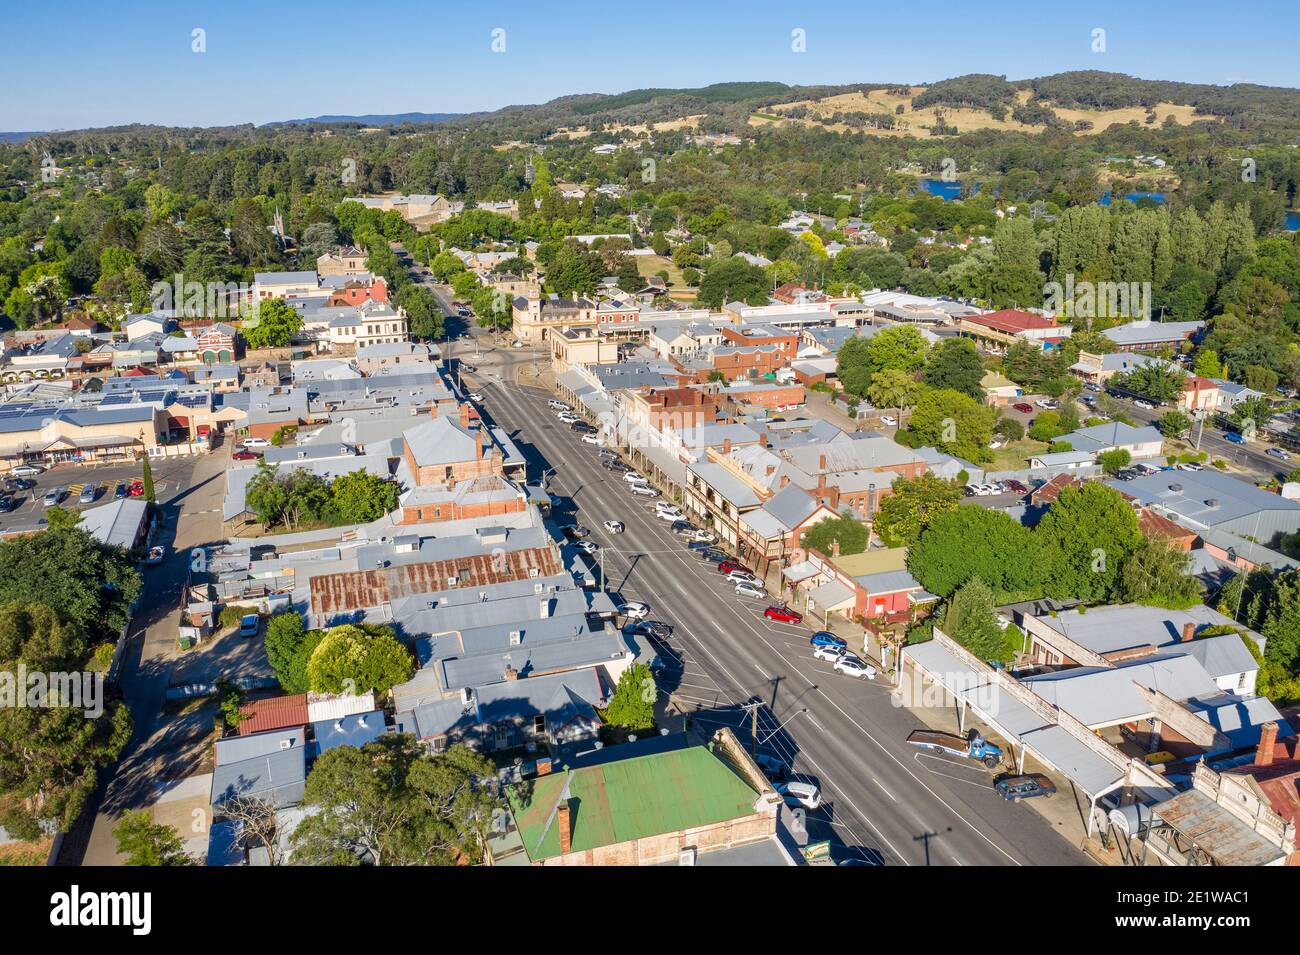 Aerial view of the main shopping street in Beechworth, Victoria, Australia Stock Photo